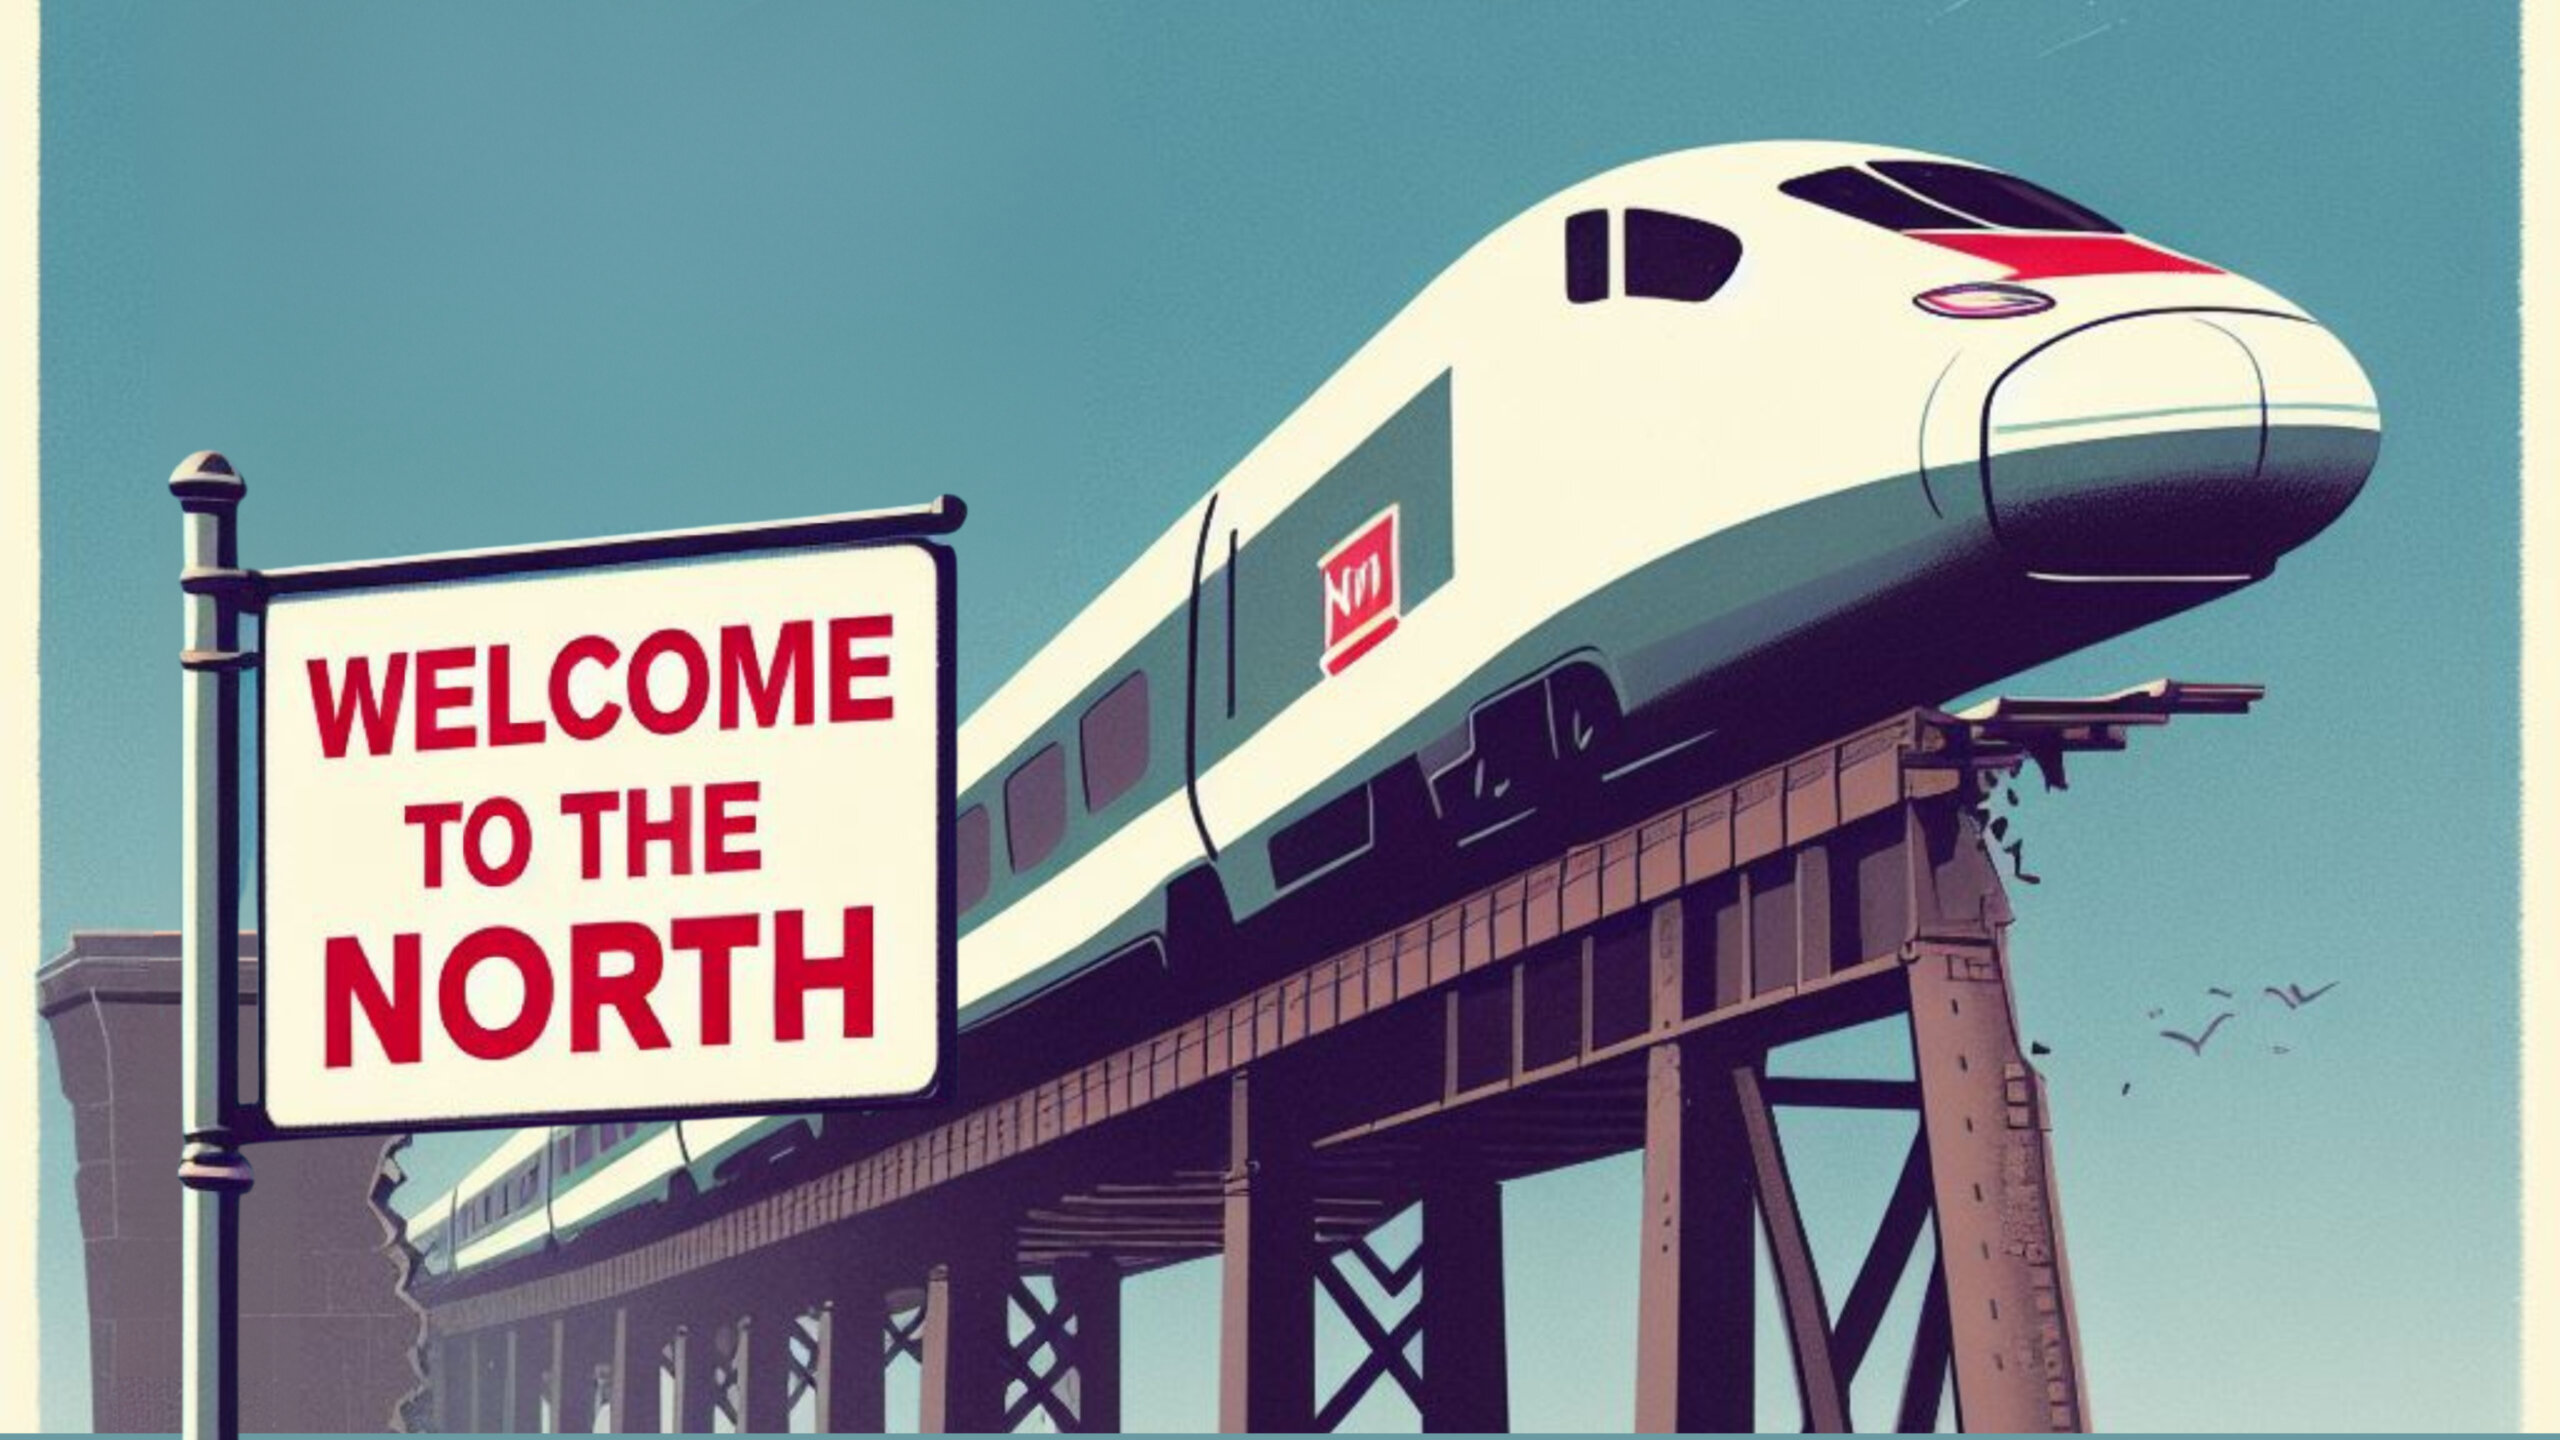 A train hangs over the end of an unfinished bridge. There is a sign on the left of the image saying 'Welcome to the North'.